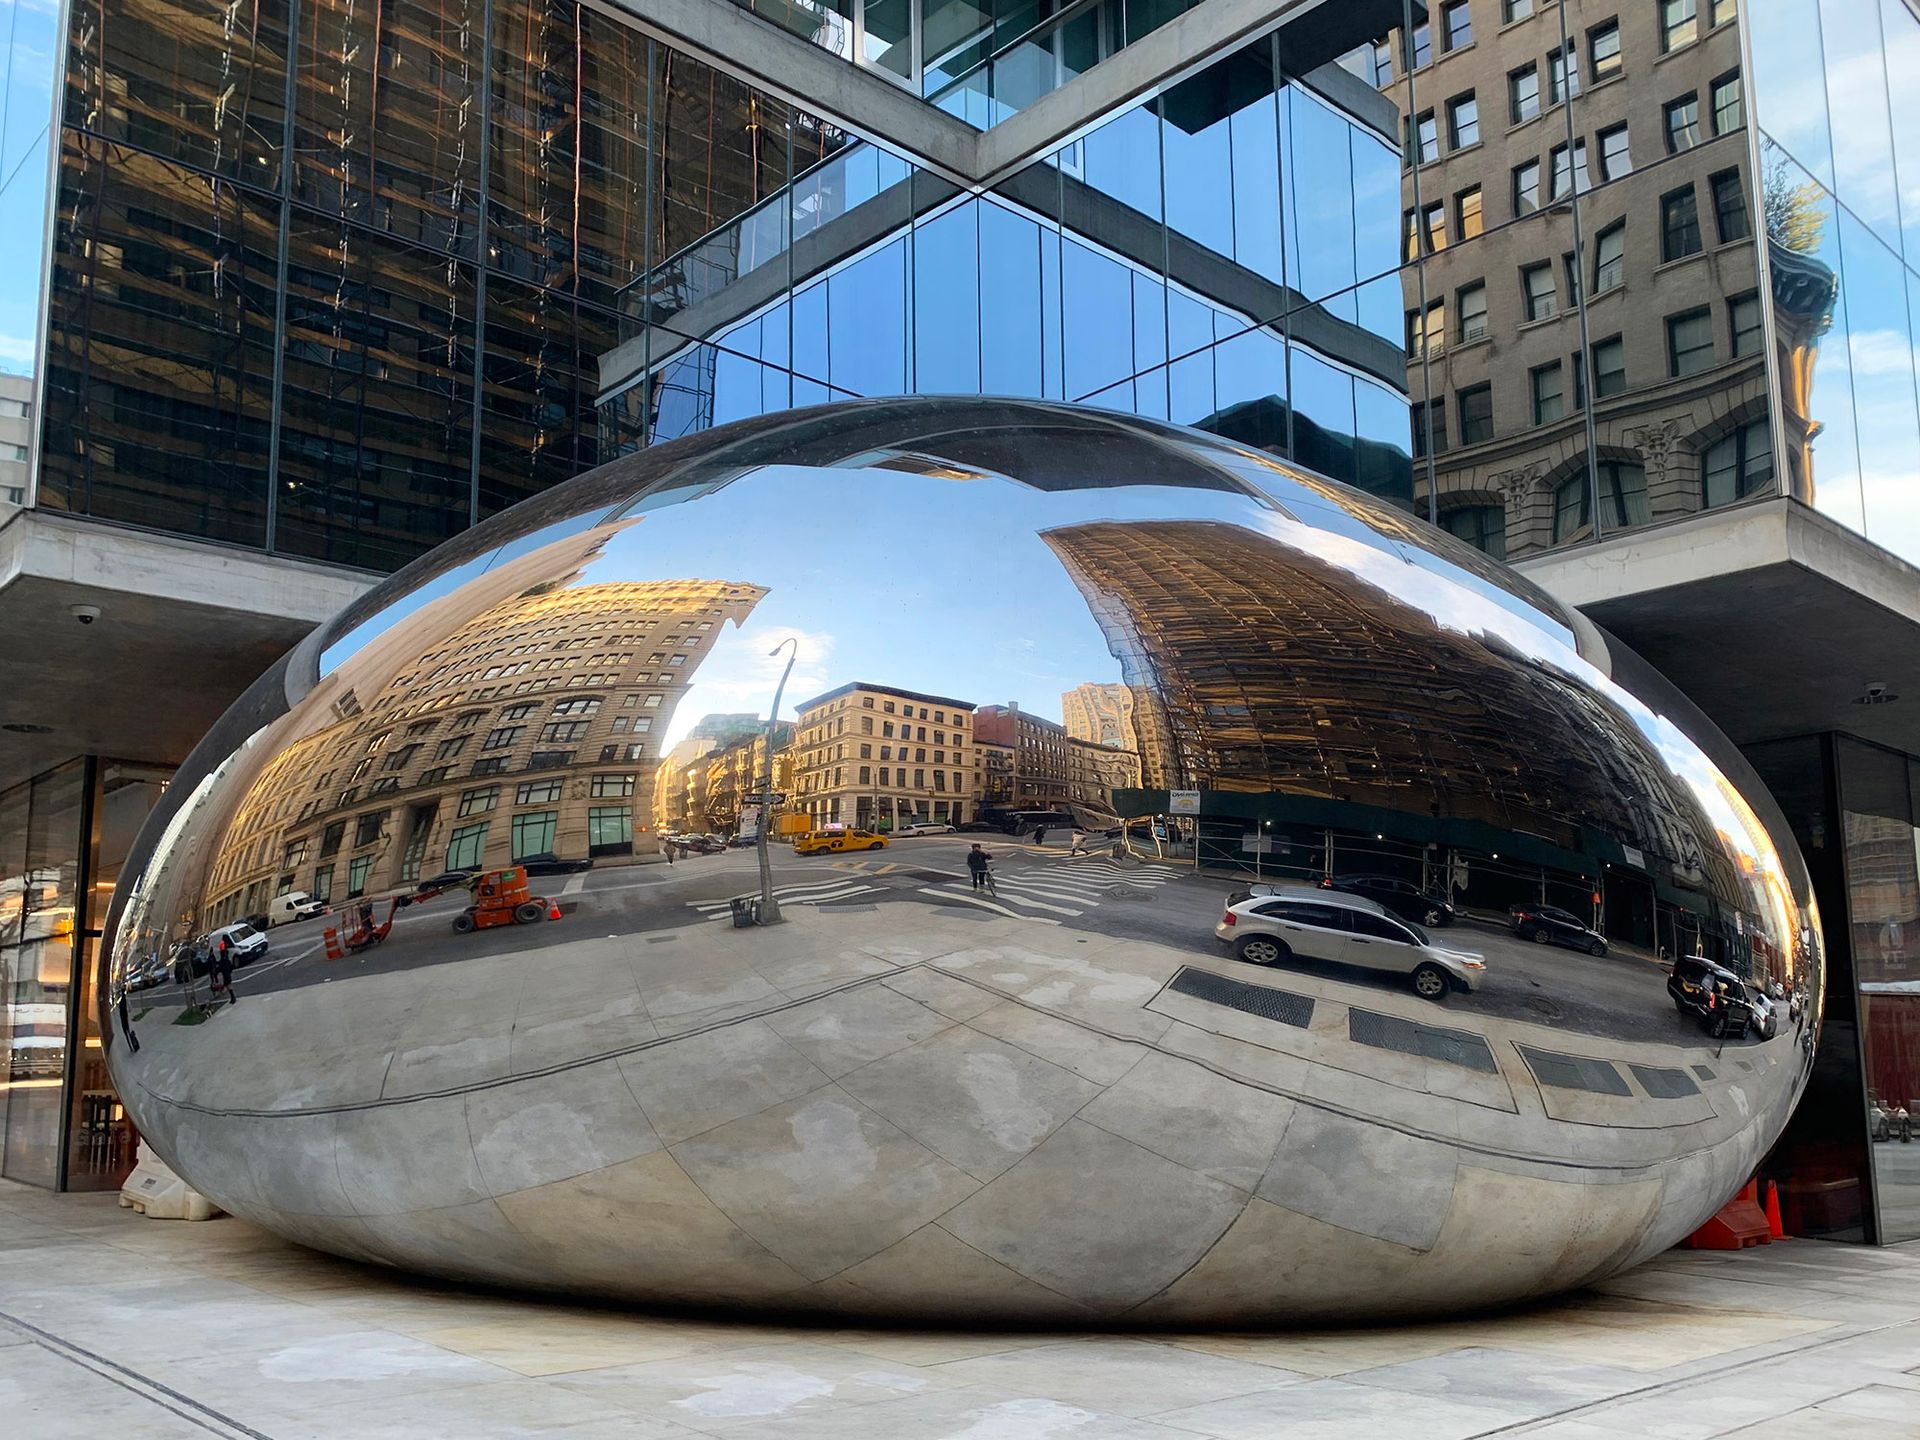 Anish Kapoor's yet-to-be-titled work at the corner of Leonard and Church streets in New York City © Benjamin Sutton